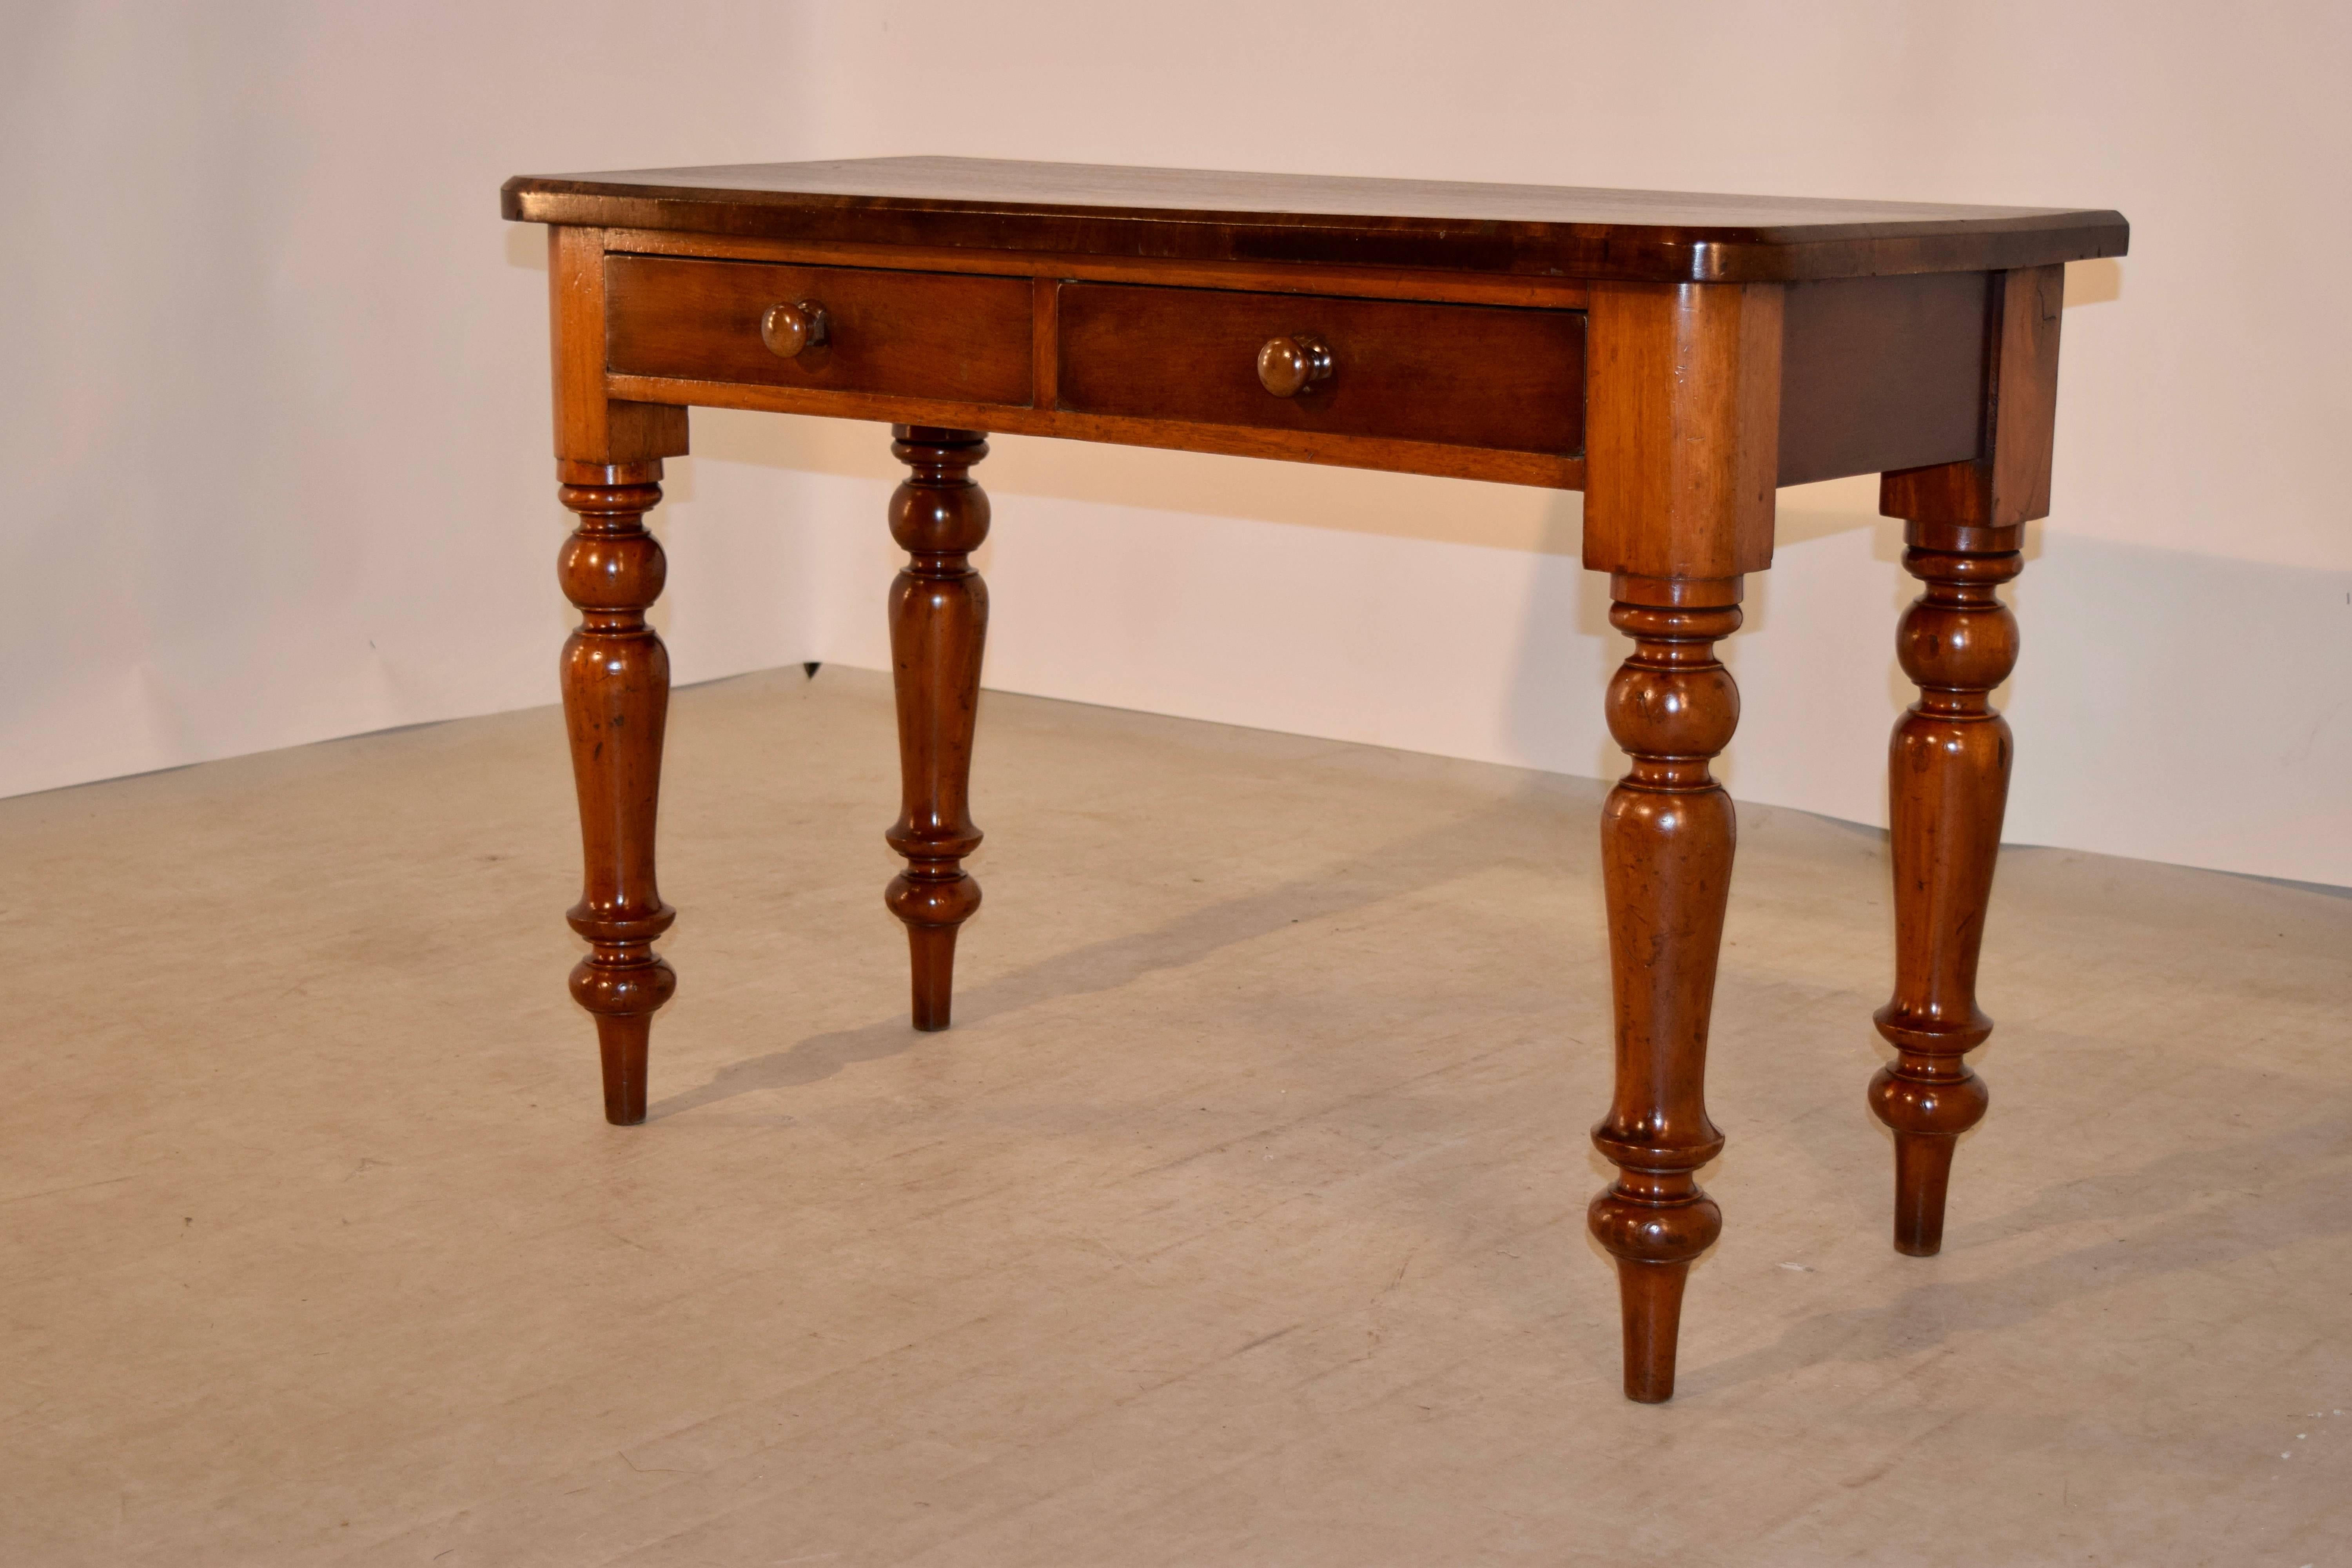 19th Century mahogany side table from England with a banded edge around the top, following down to two drawers in the front and simple sides.  The piece is raised on hand turned legs.  